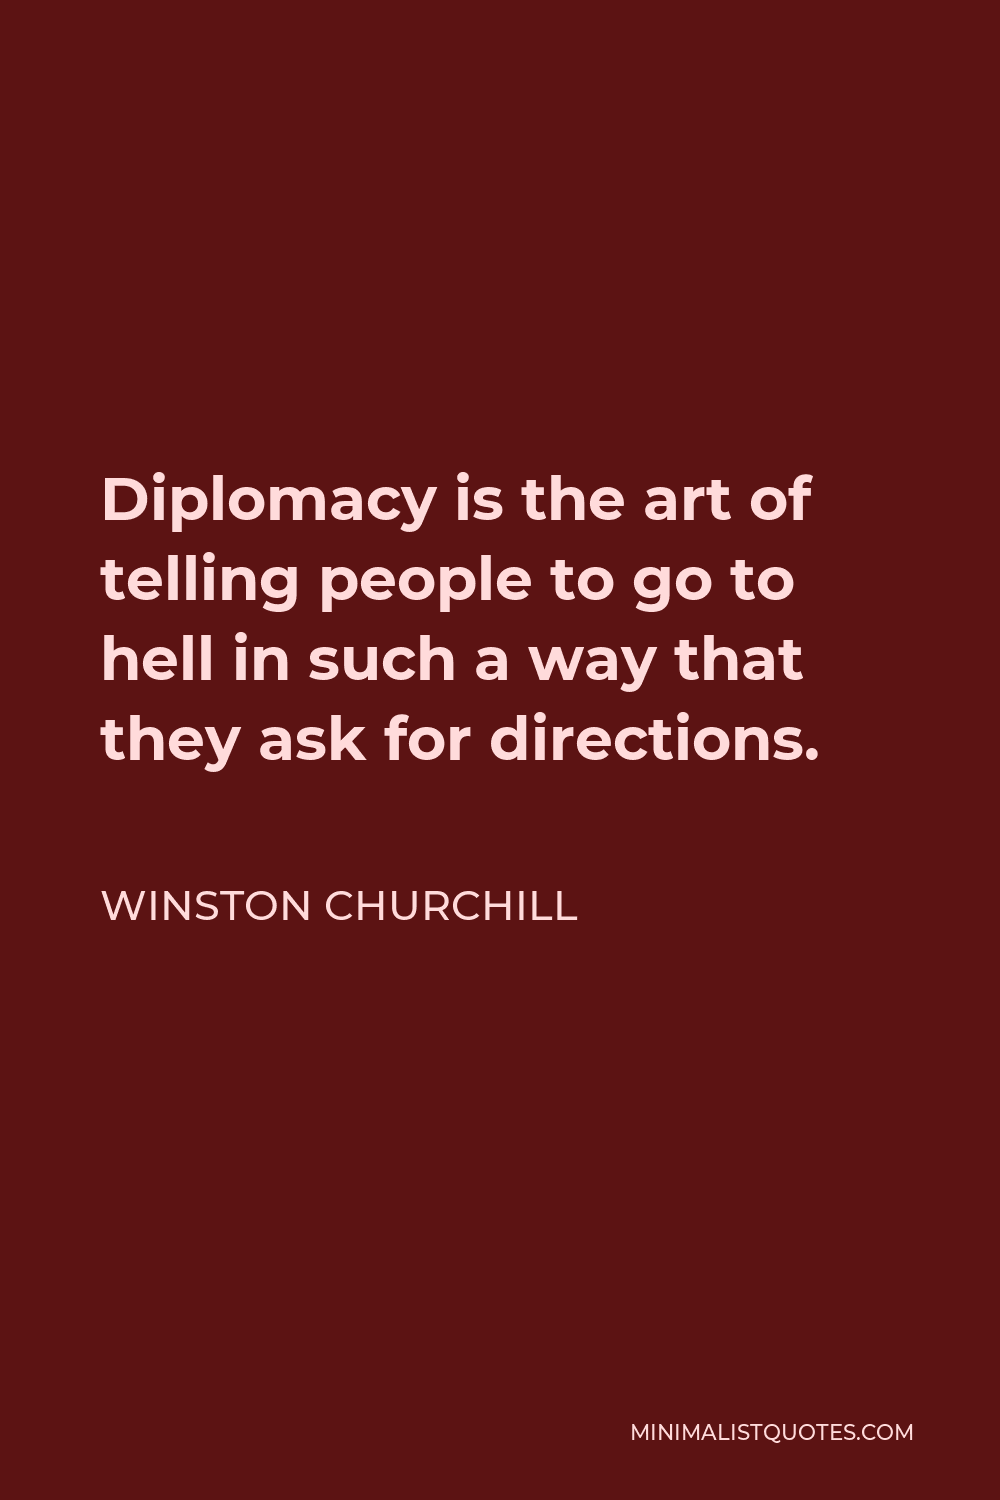 Winston Churchill Quote - Diplomacy is the art of telling people to go to hell in such a way that they ask for directions.